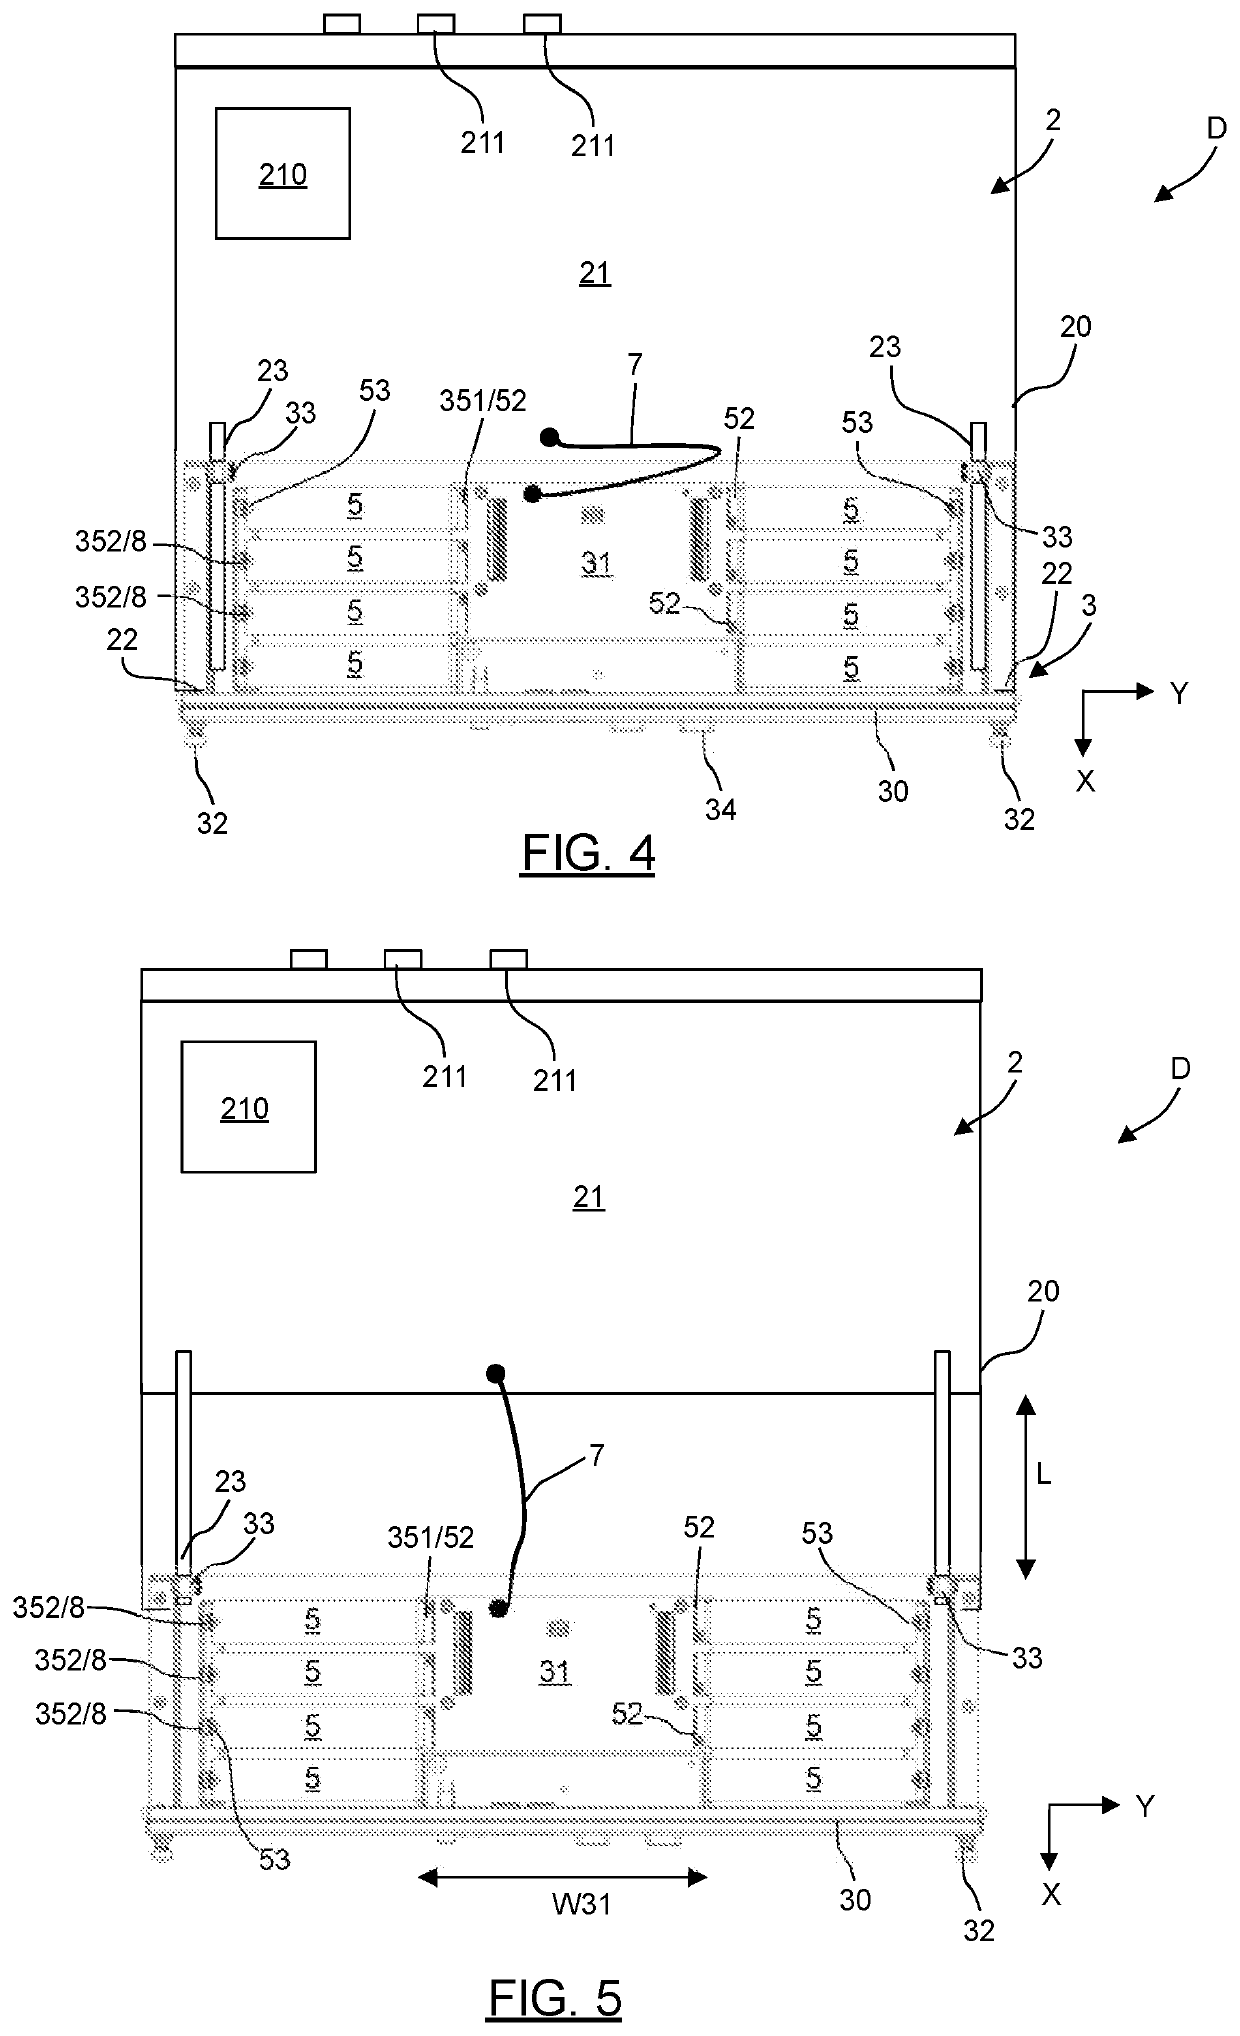 Electronic device configured to be mounted in a cluster housing and comprising a front tray for mounting at least one expansion card